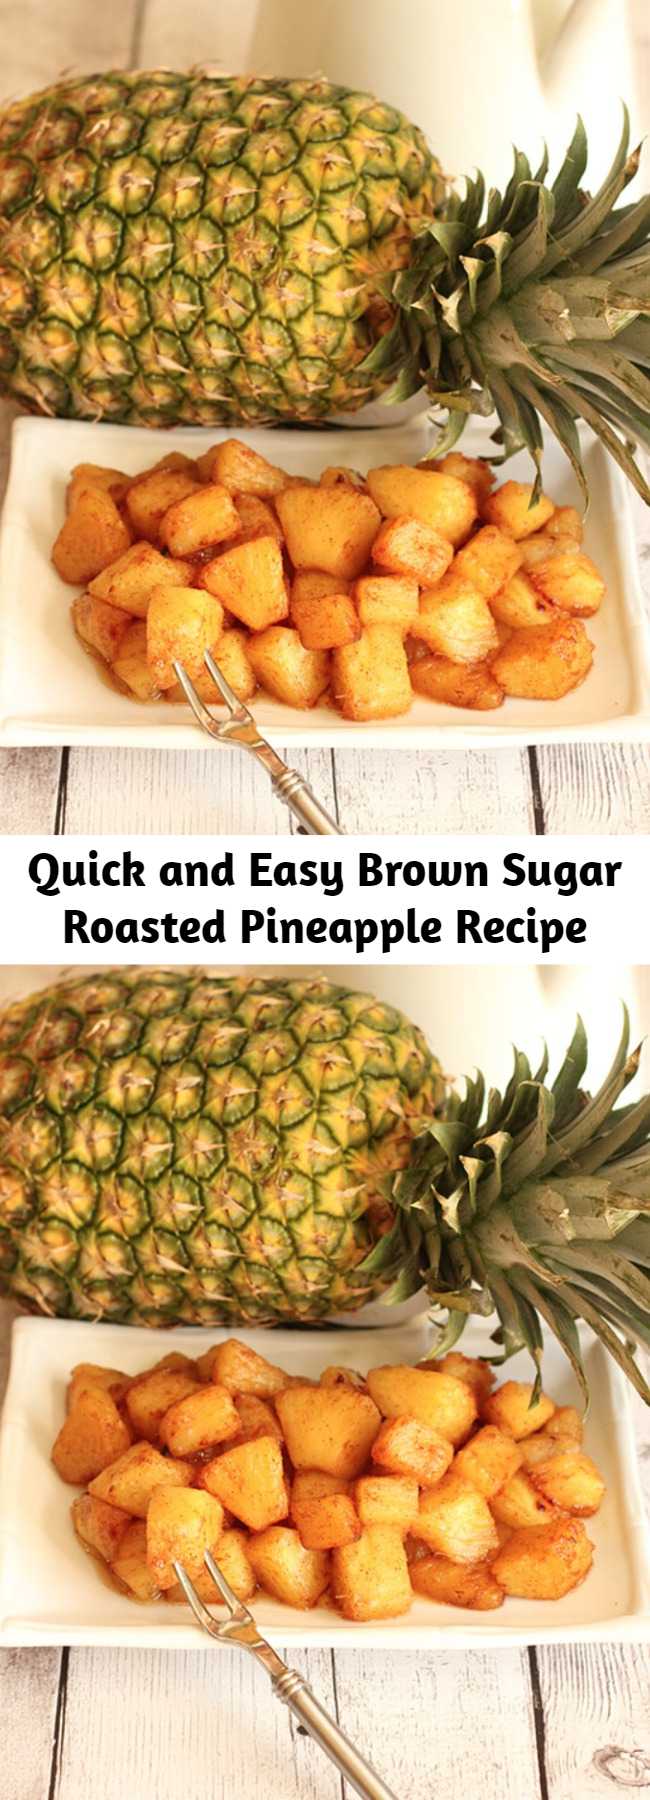 Quick and Easy Brown Sugar Roasted Pineapple Recipe - We love this roasted pineapple with brown sugar, butter and a hint of cinnamon. It is a quick side dish that is as good as grilled pineapple any day! Roasting concentrates the sweet pineapple flavor for delicious results.